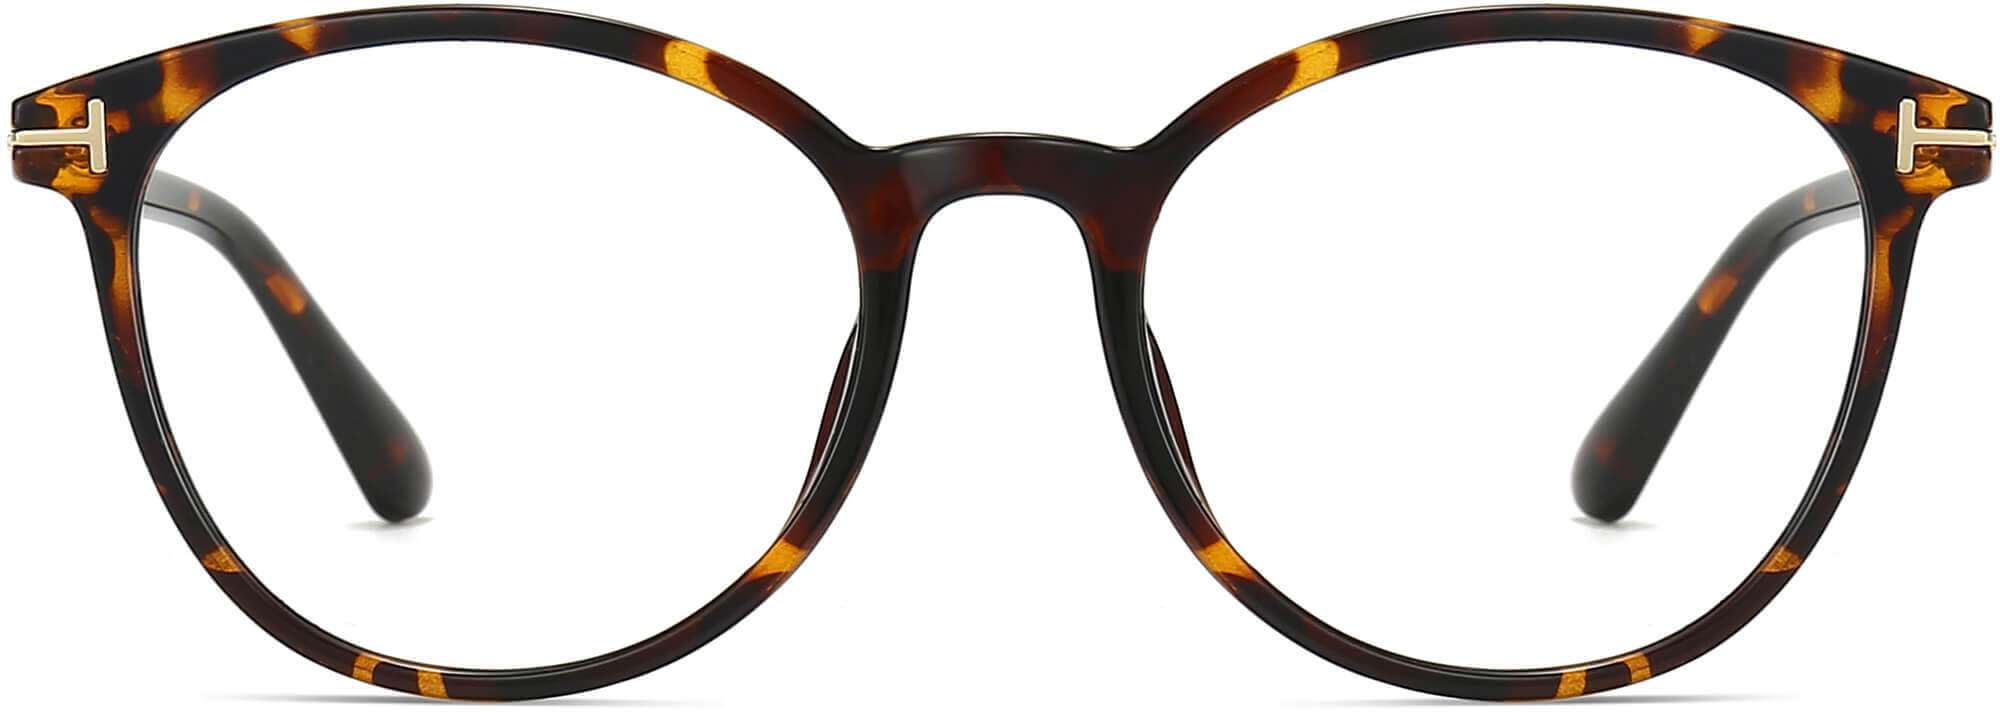 Arlo Round Tortoise Eyeglasses from ANRRI, front view